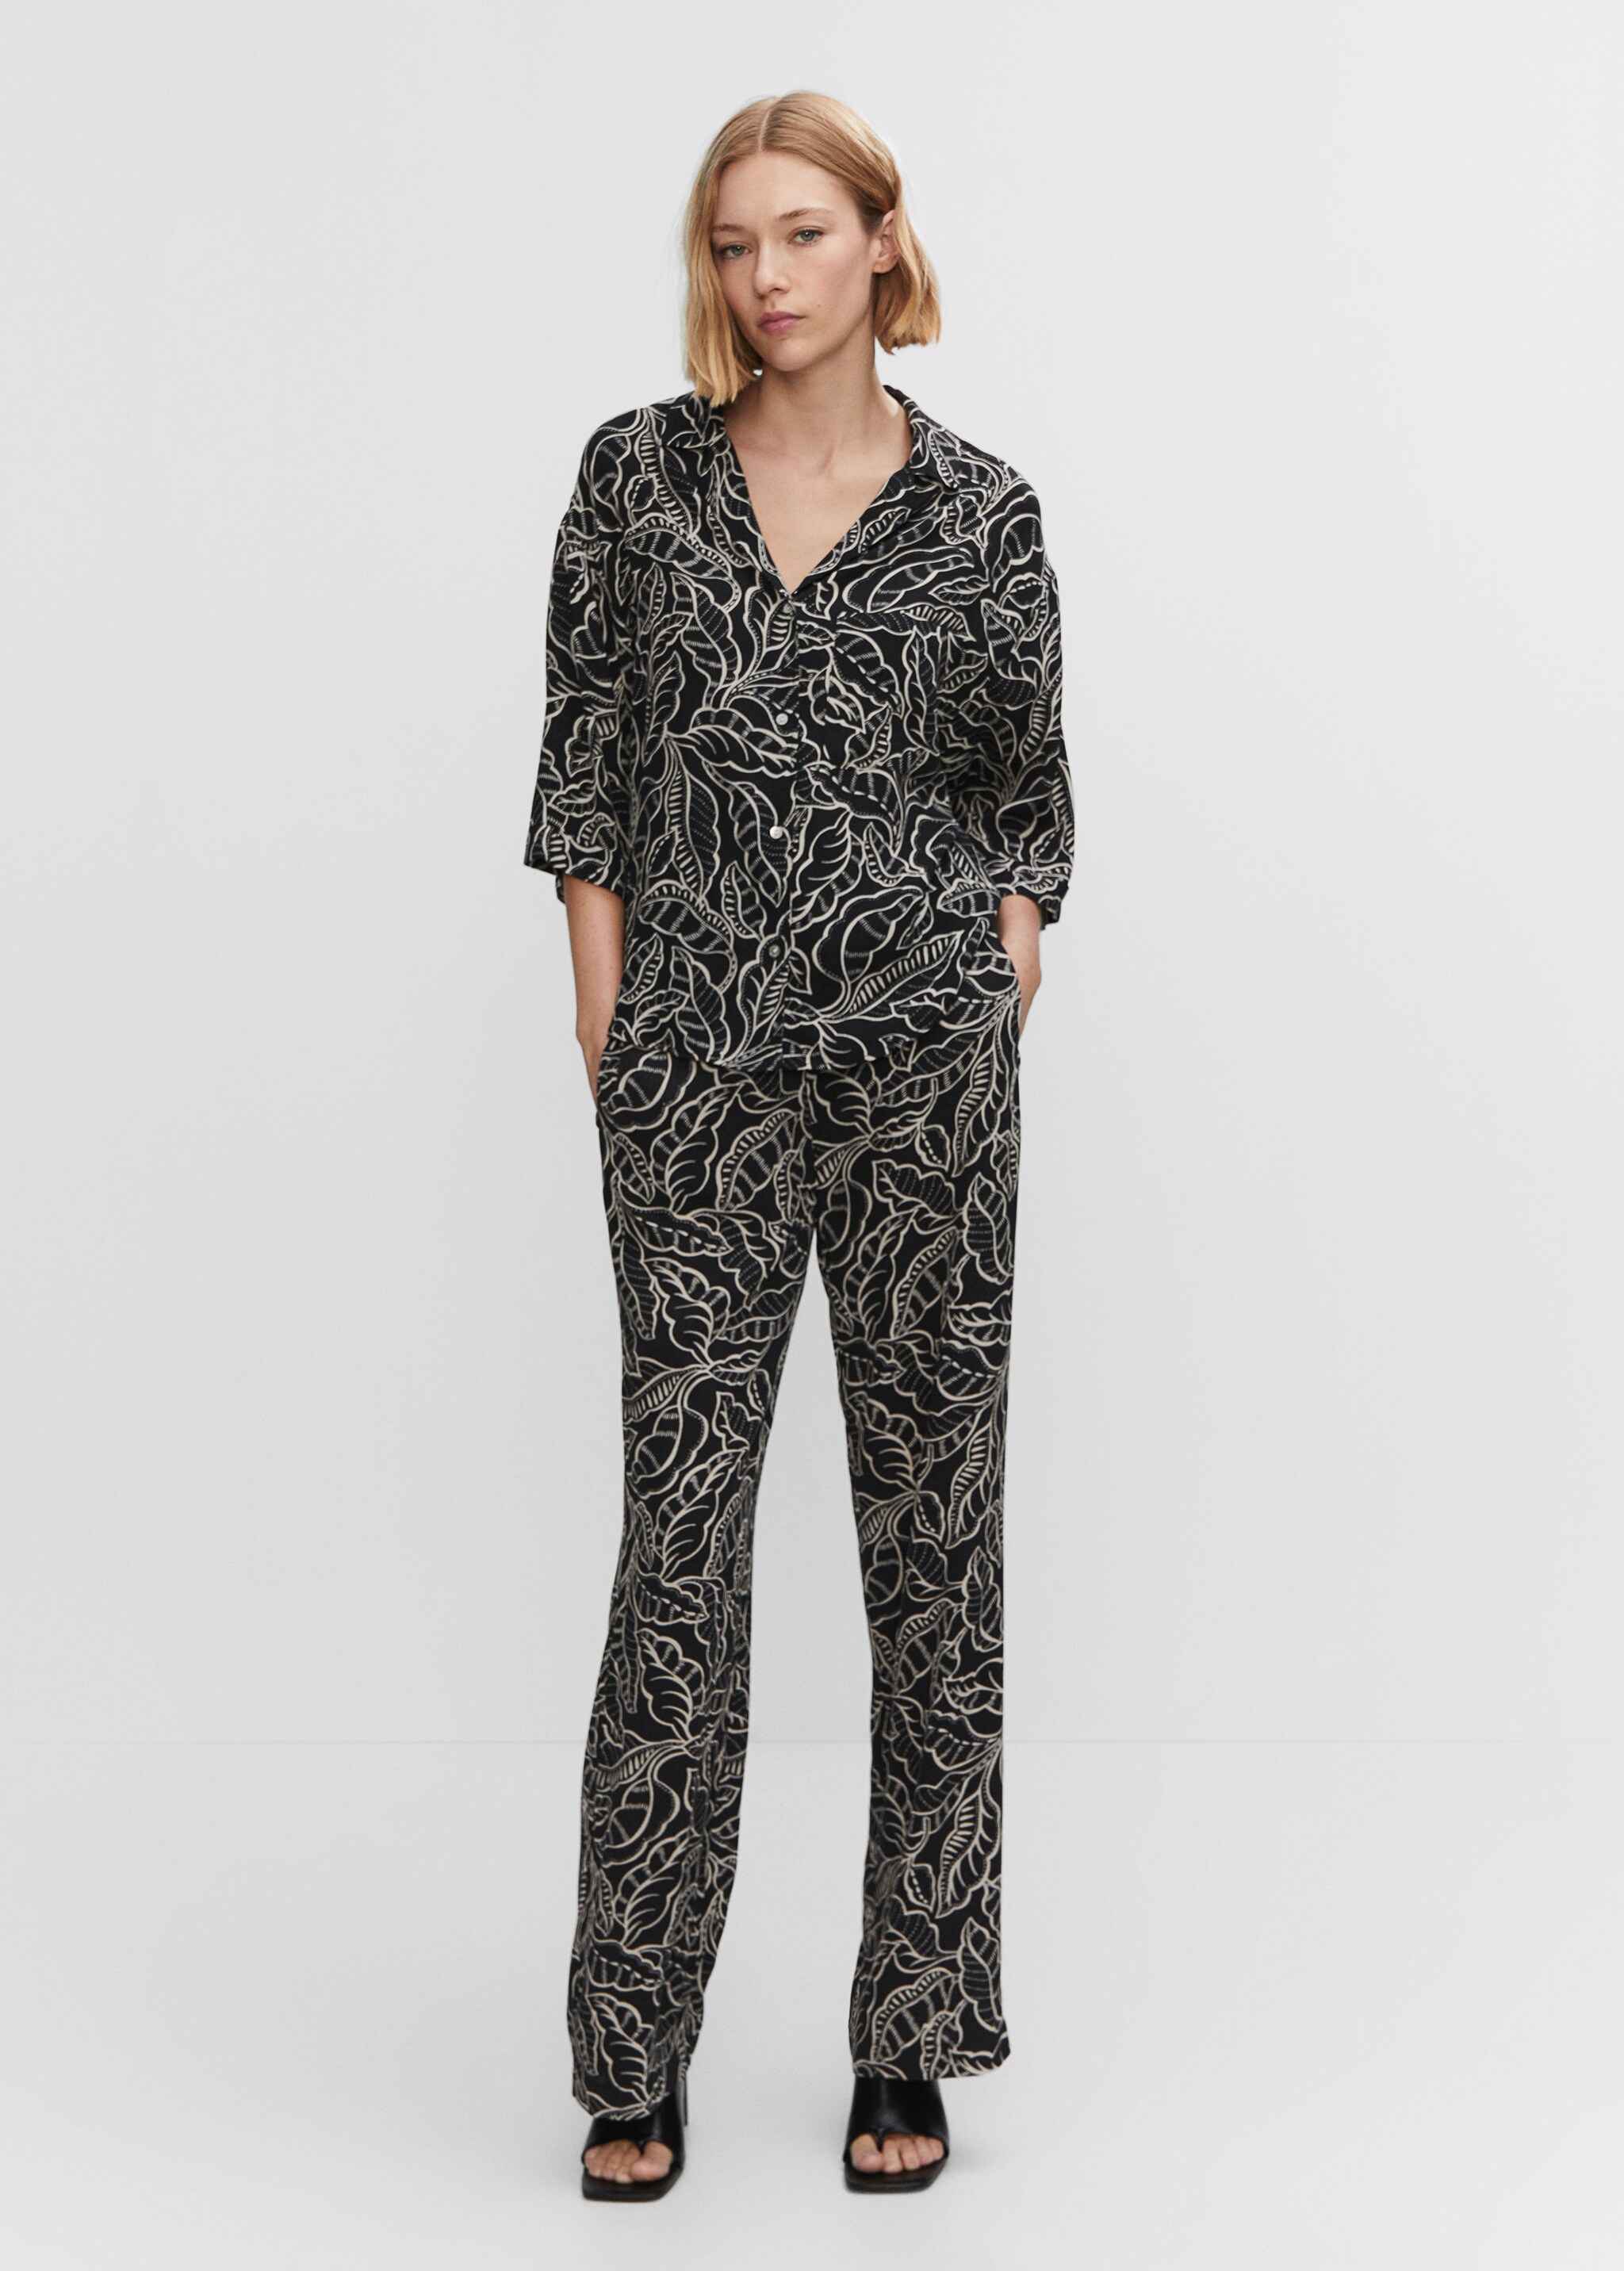 Floral palazzo trousers - General plane